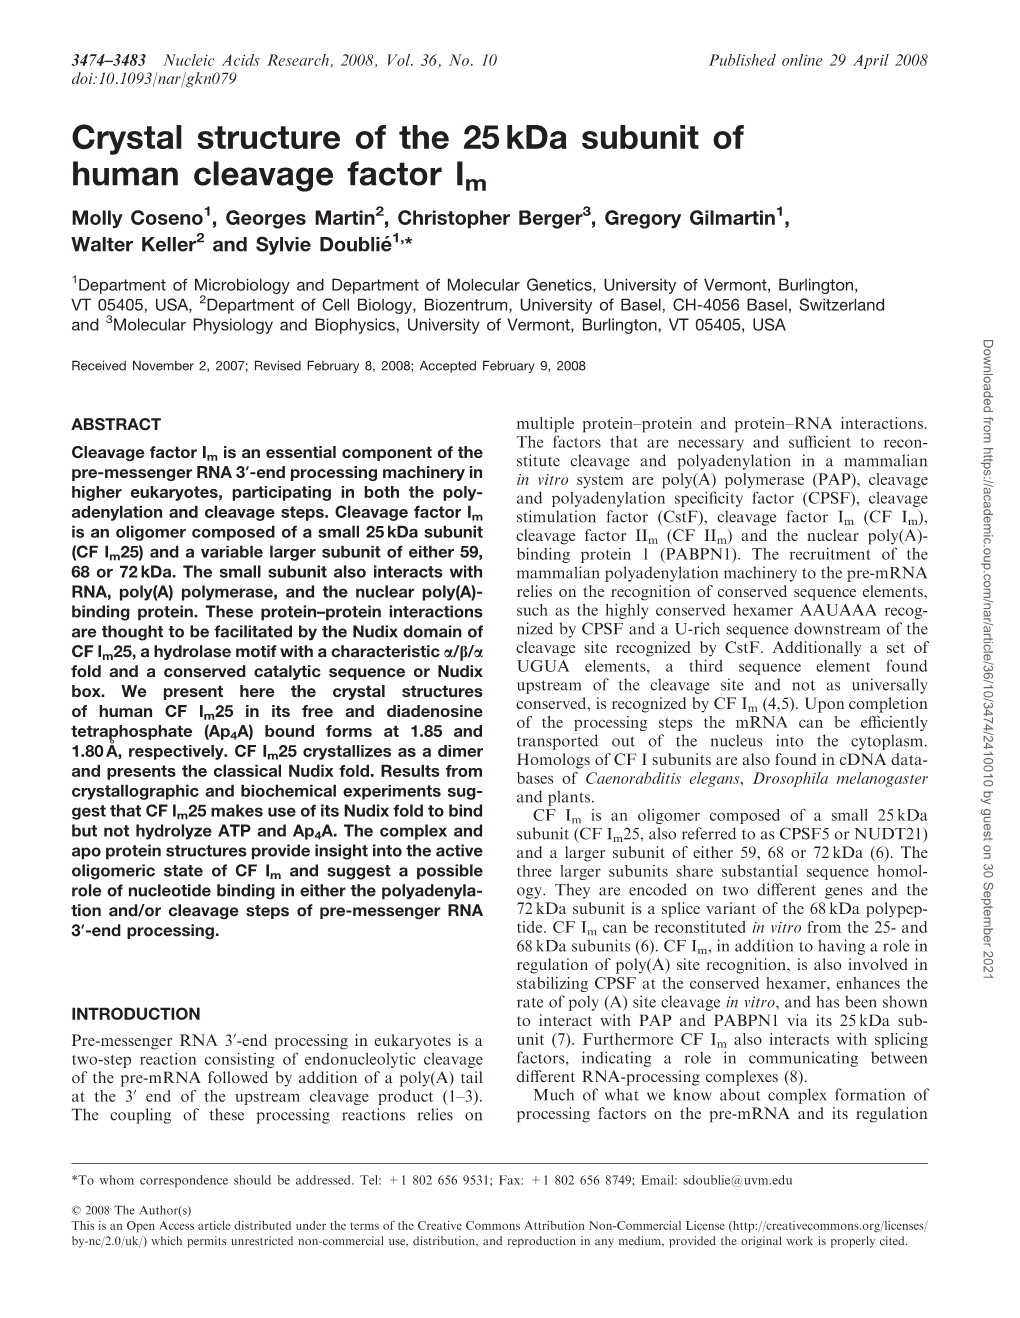 Crystal Structure of the 25Kda Subunit of Human Cleavage Factor Im